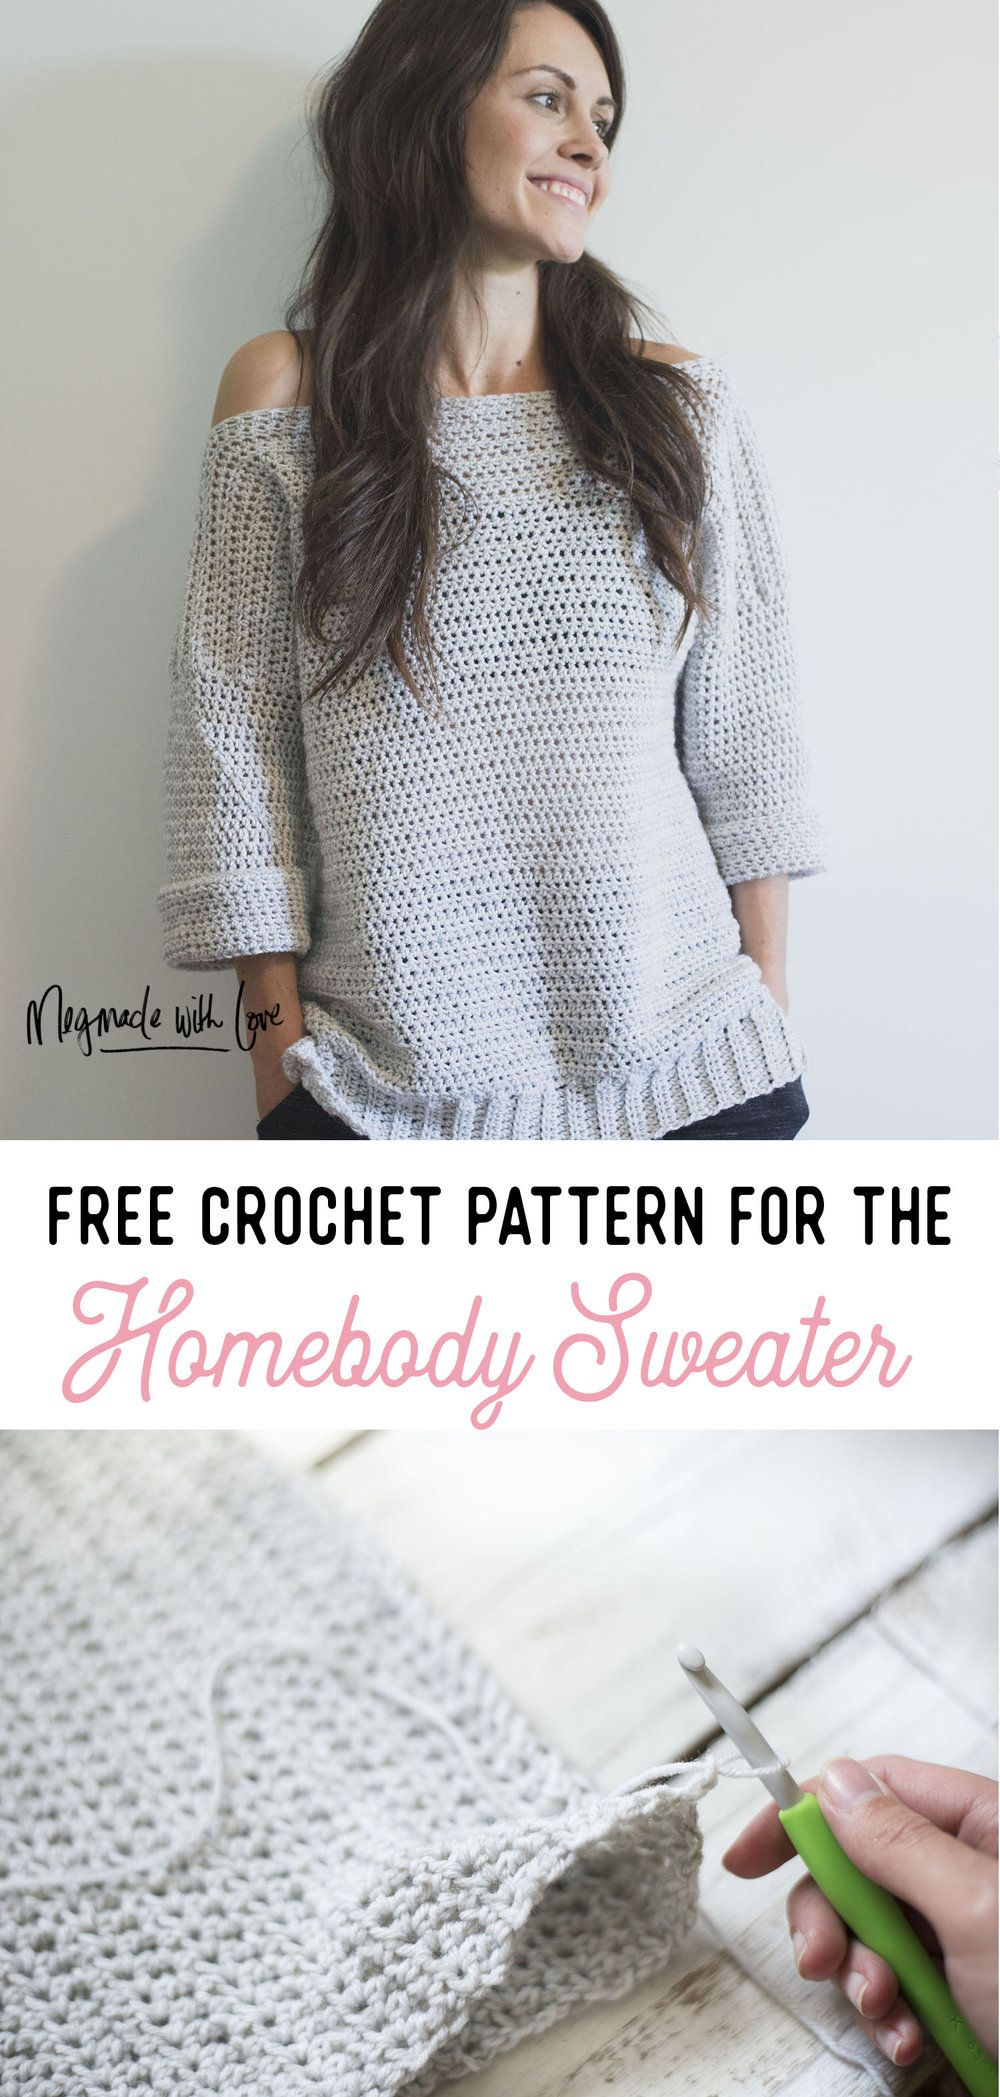 Crochet Sweater Pattern Free Crochet Pattern For The Homebody Sweater Easy Comfy And Cute